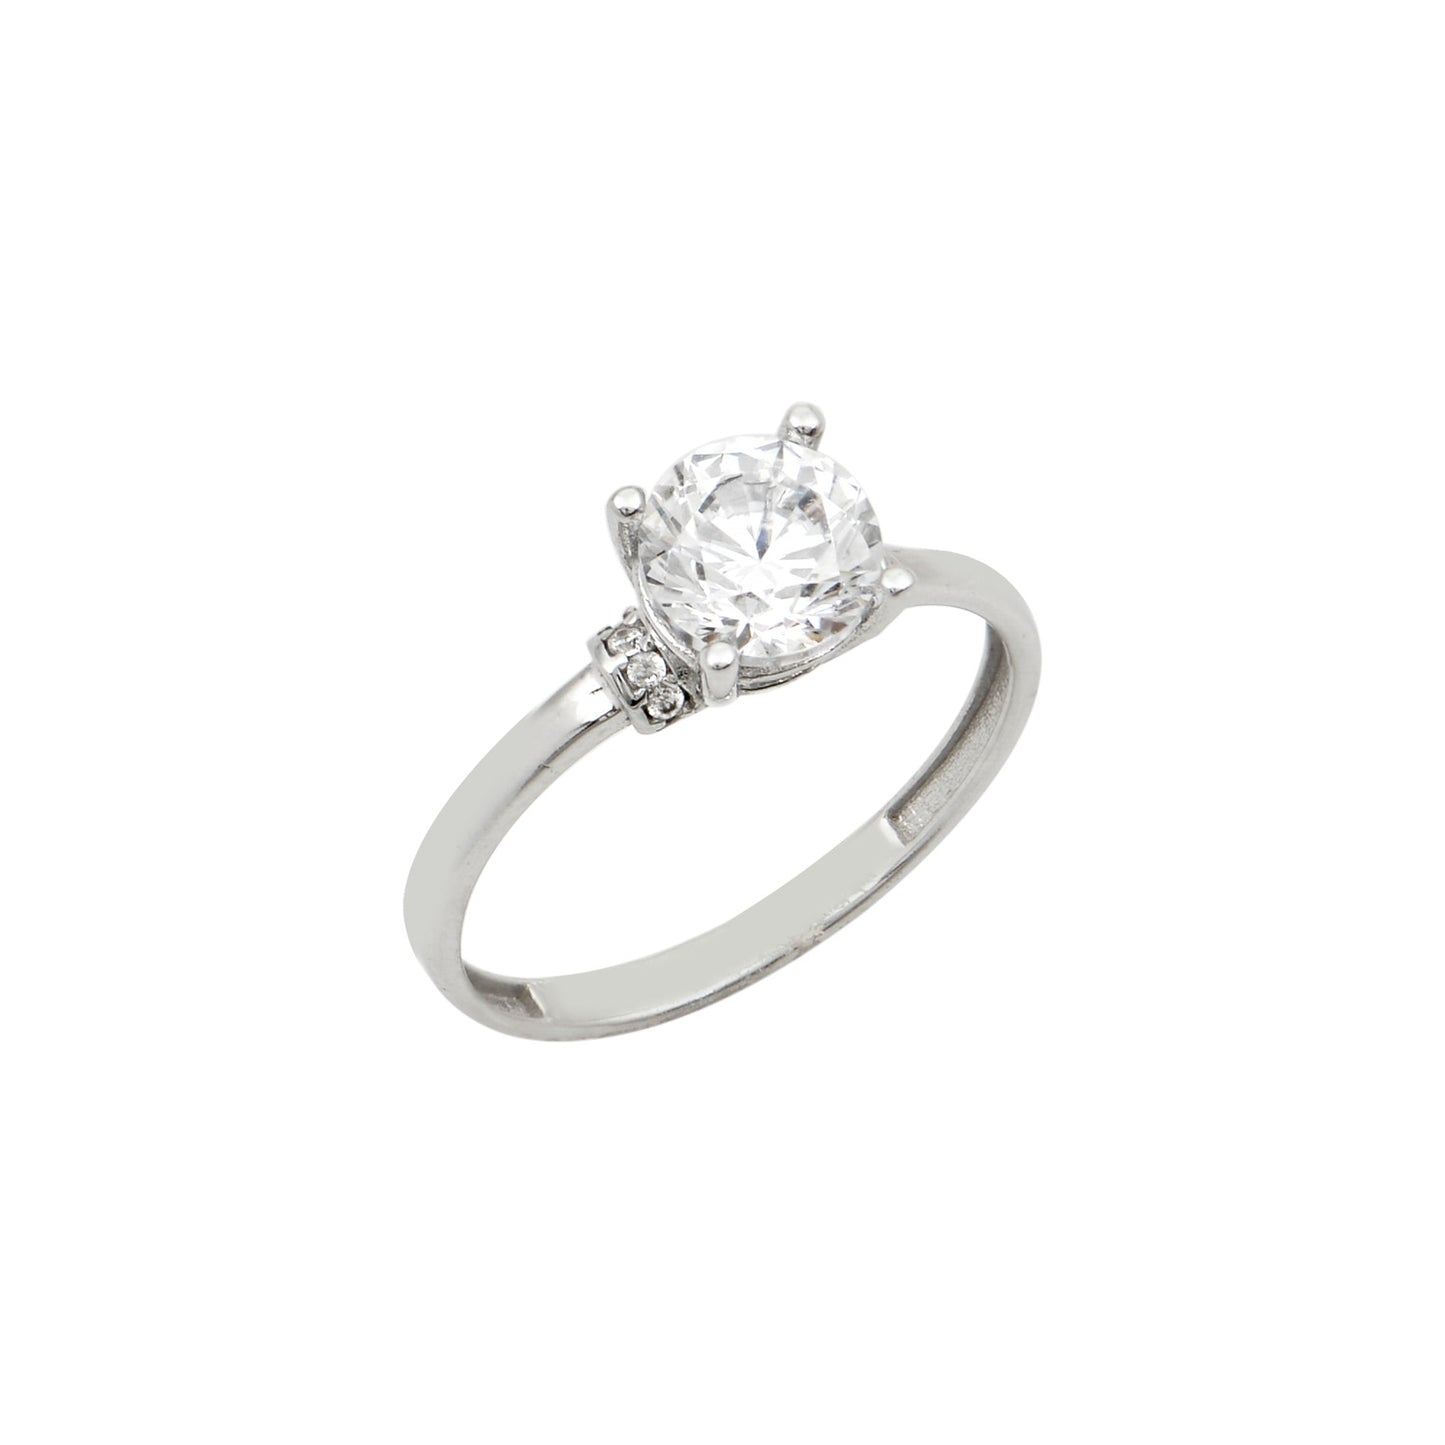 Ring DXH587W Single Stone in White Gold 9ct With Zircon